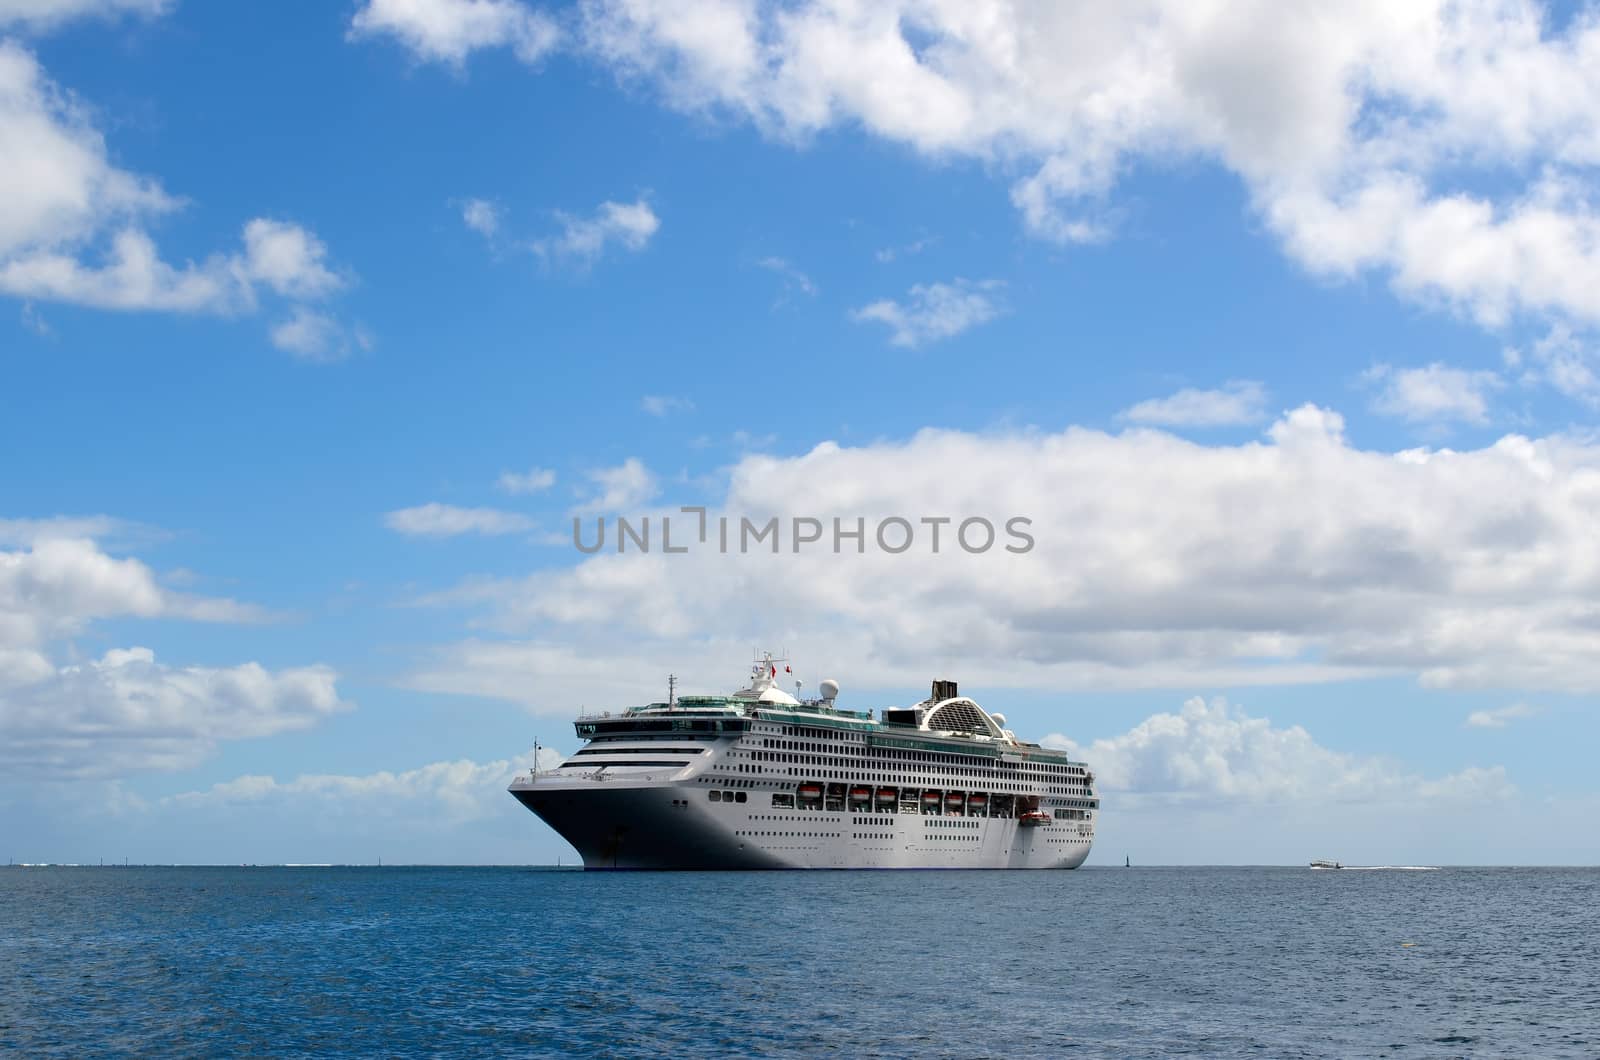 Cruise ship in the sea by pljvv